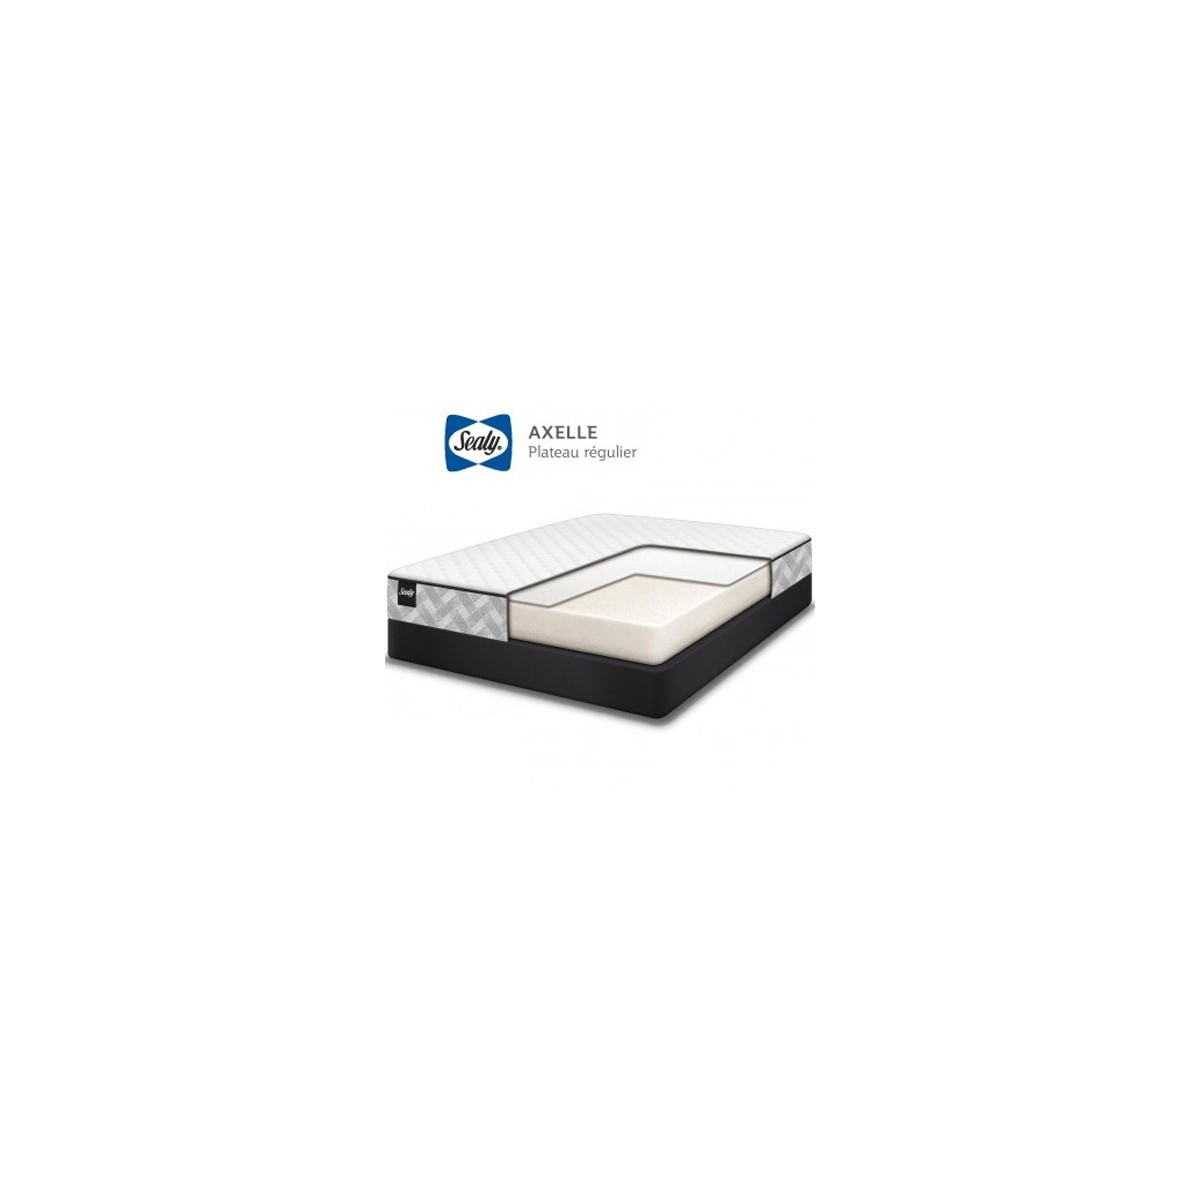 Sealy Axelle Mattress firm 5 INCHES